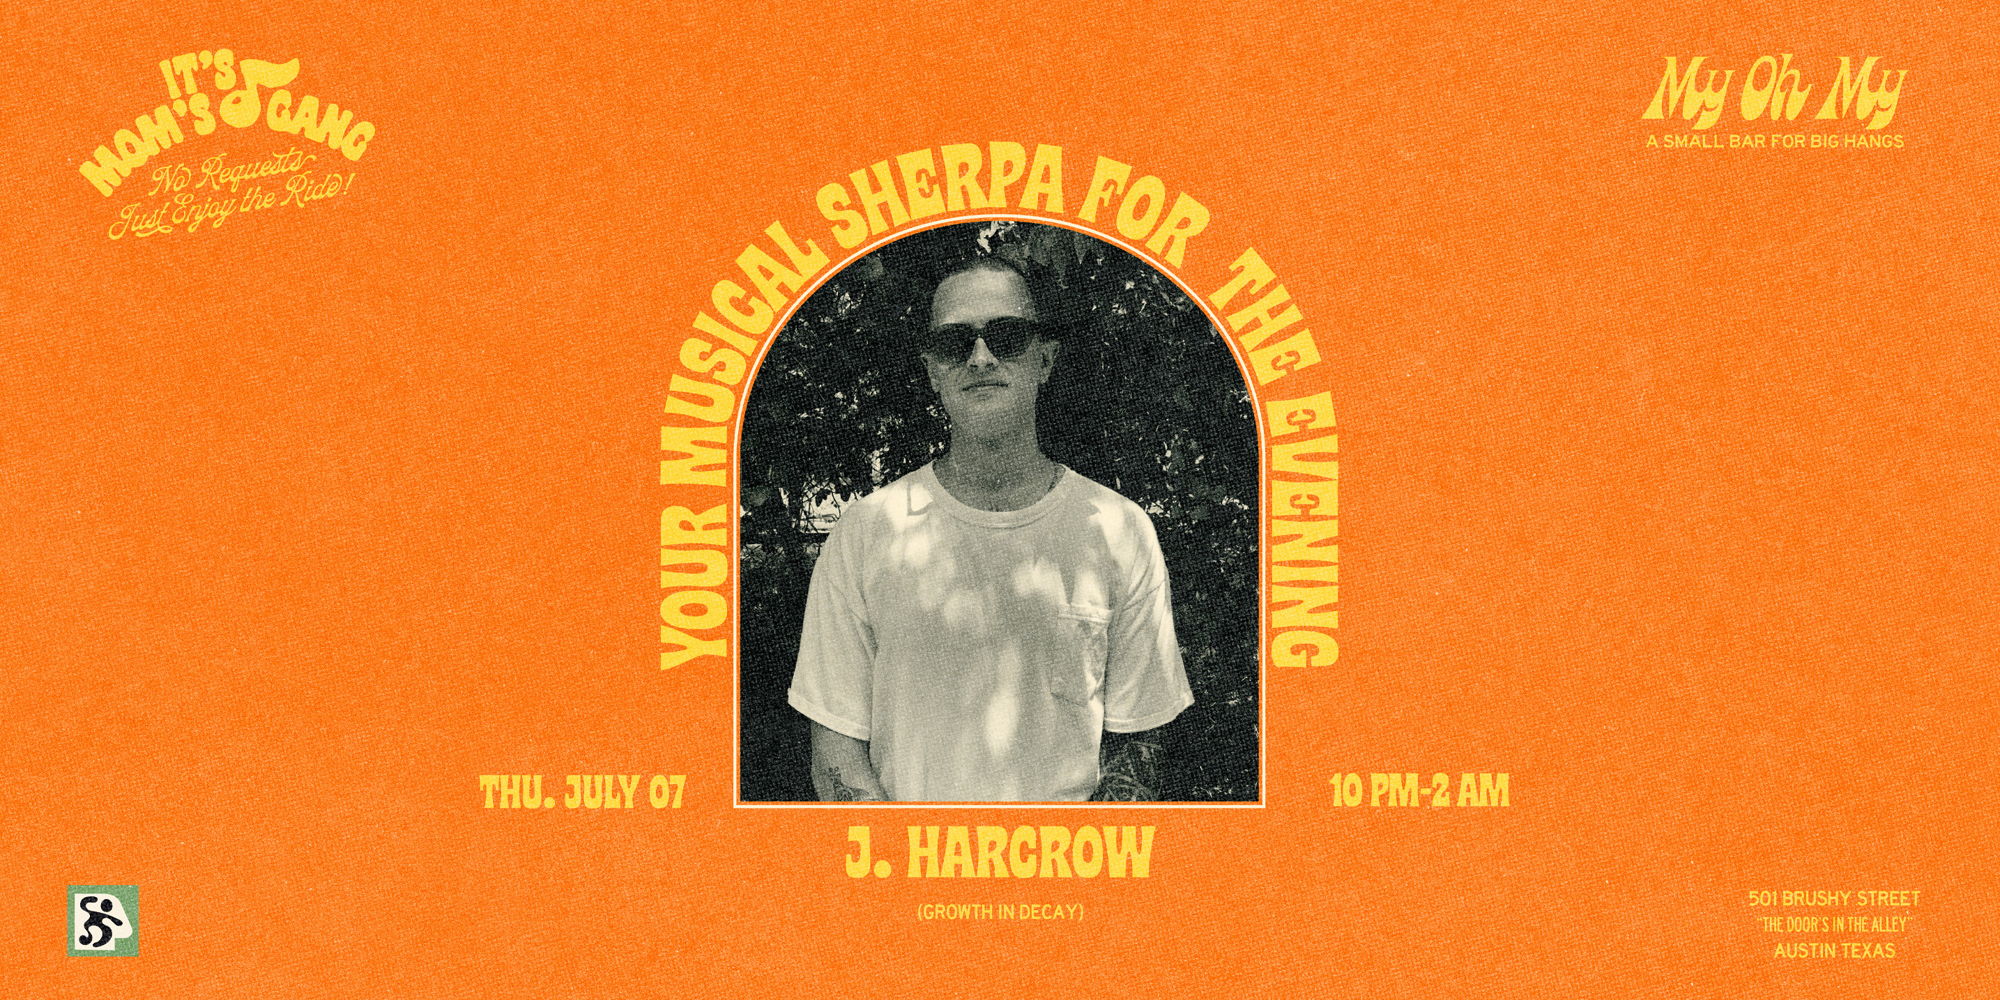 J. Harcrow (Growth In Decay) @ My Oh My on July 7th promotional image